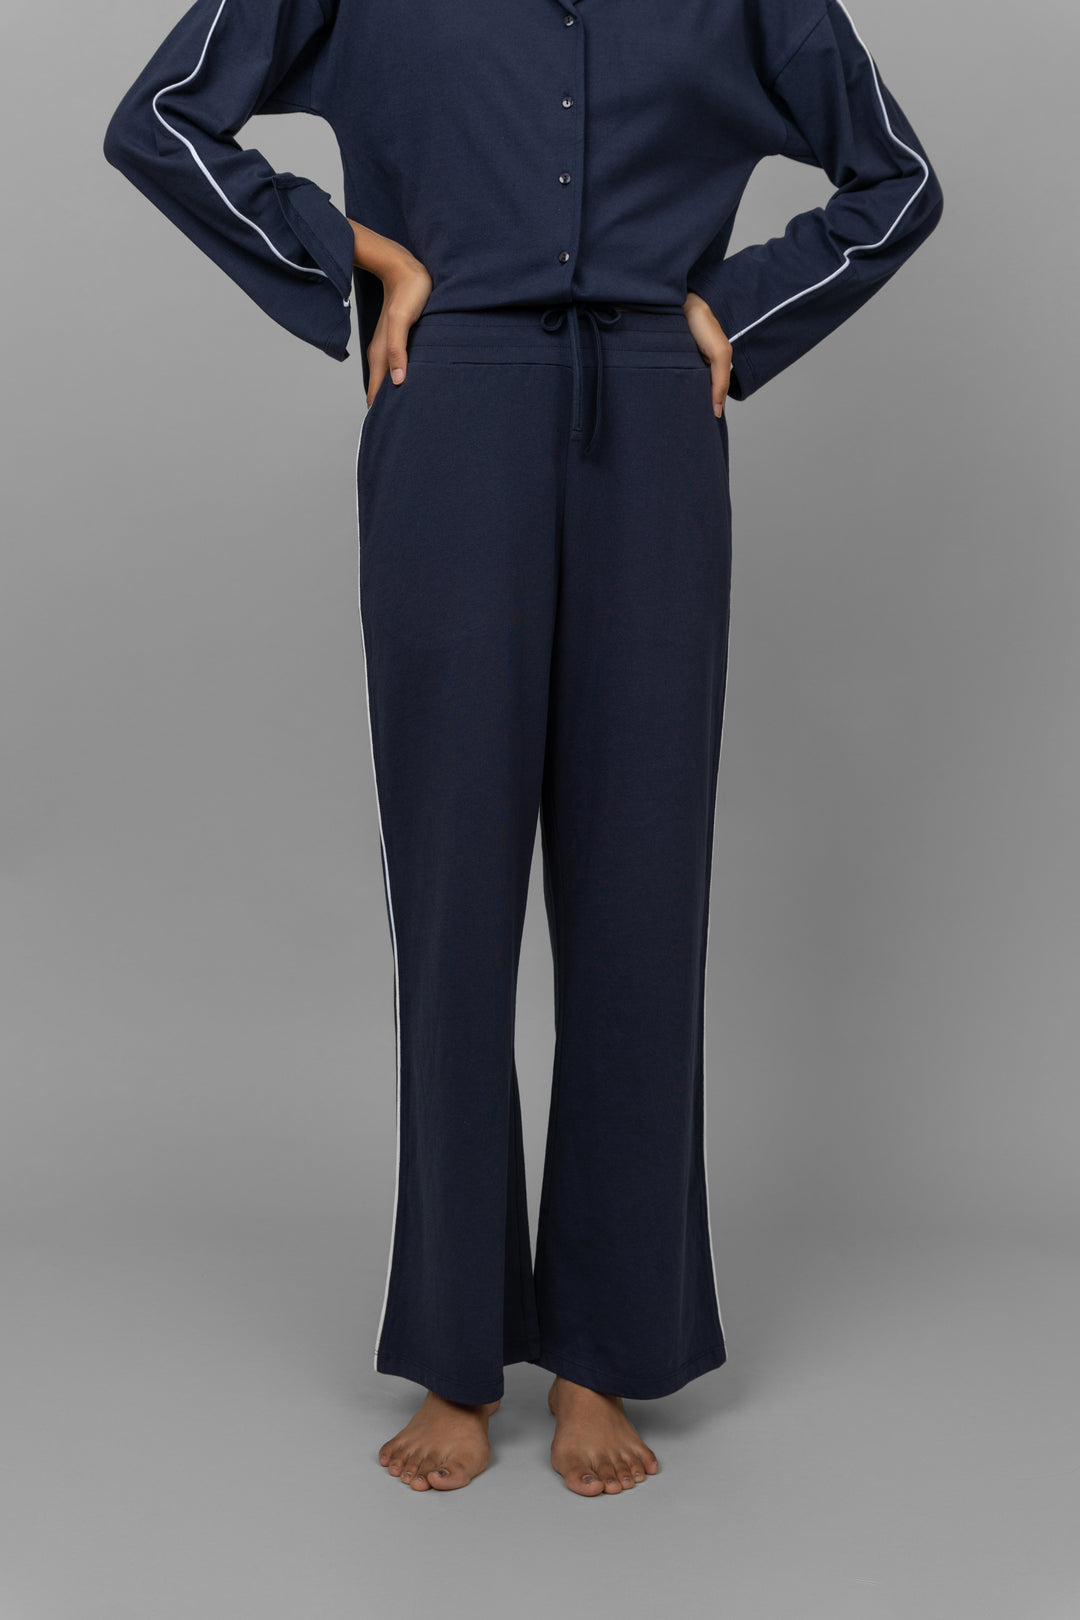 Navy Contrast Piping Pant